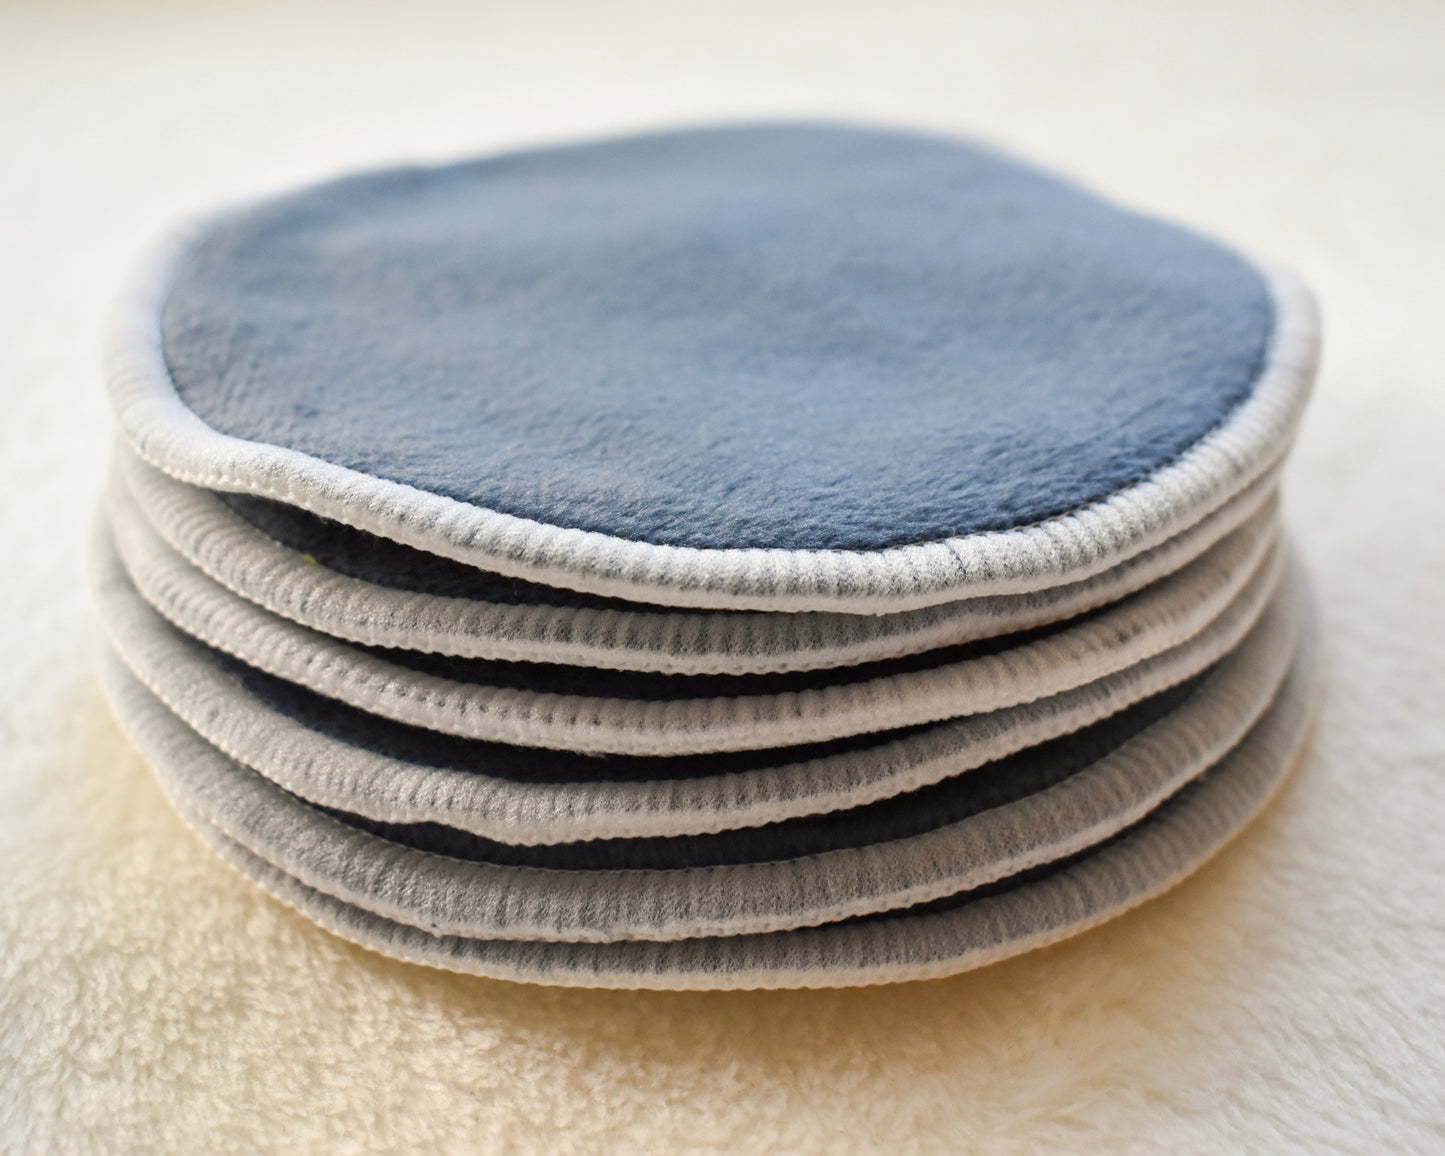 Reusable organic bamboo nursing pads in blue from Fourth Trimester Mama